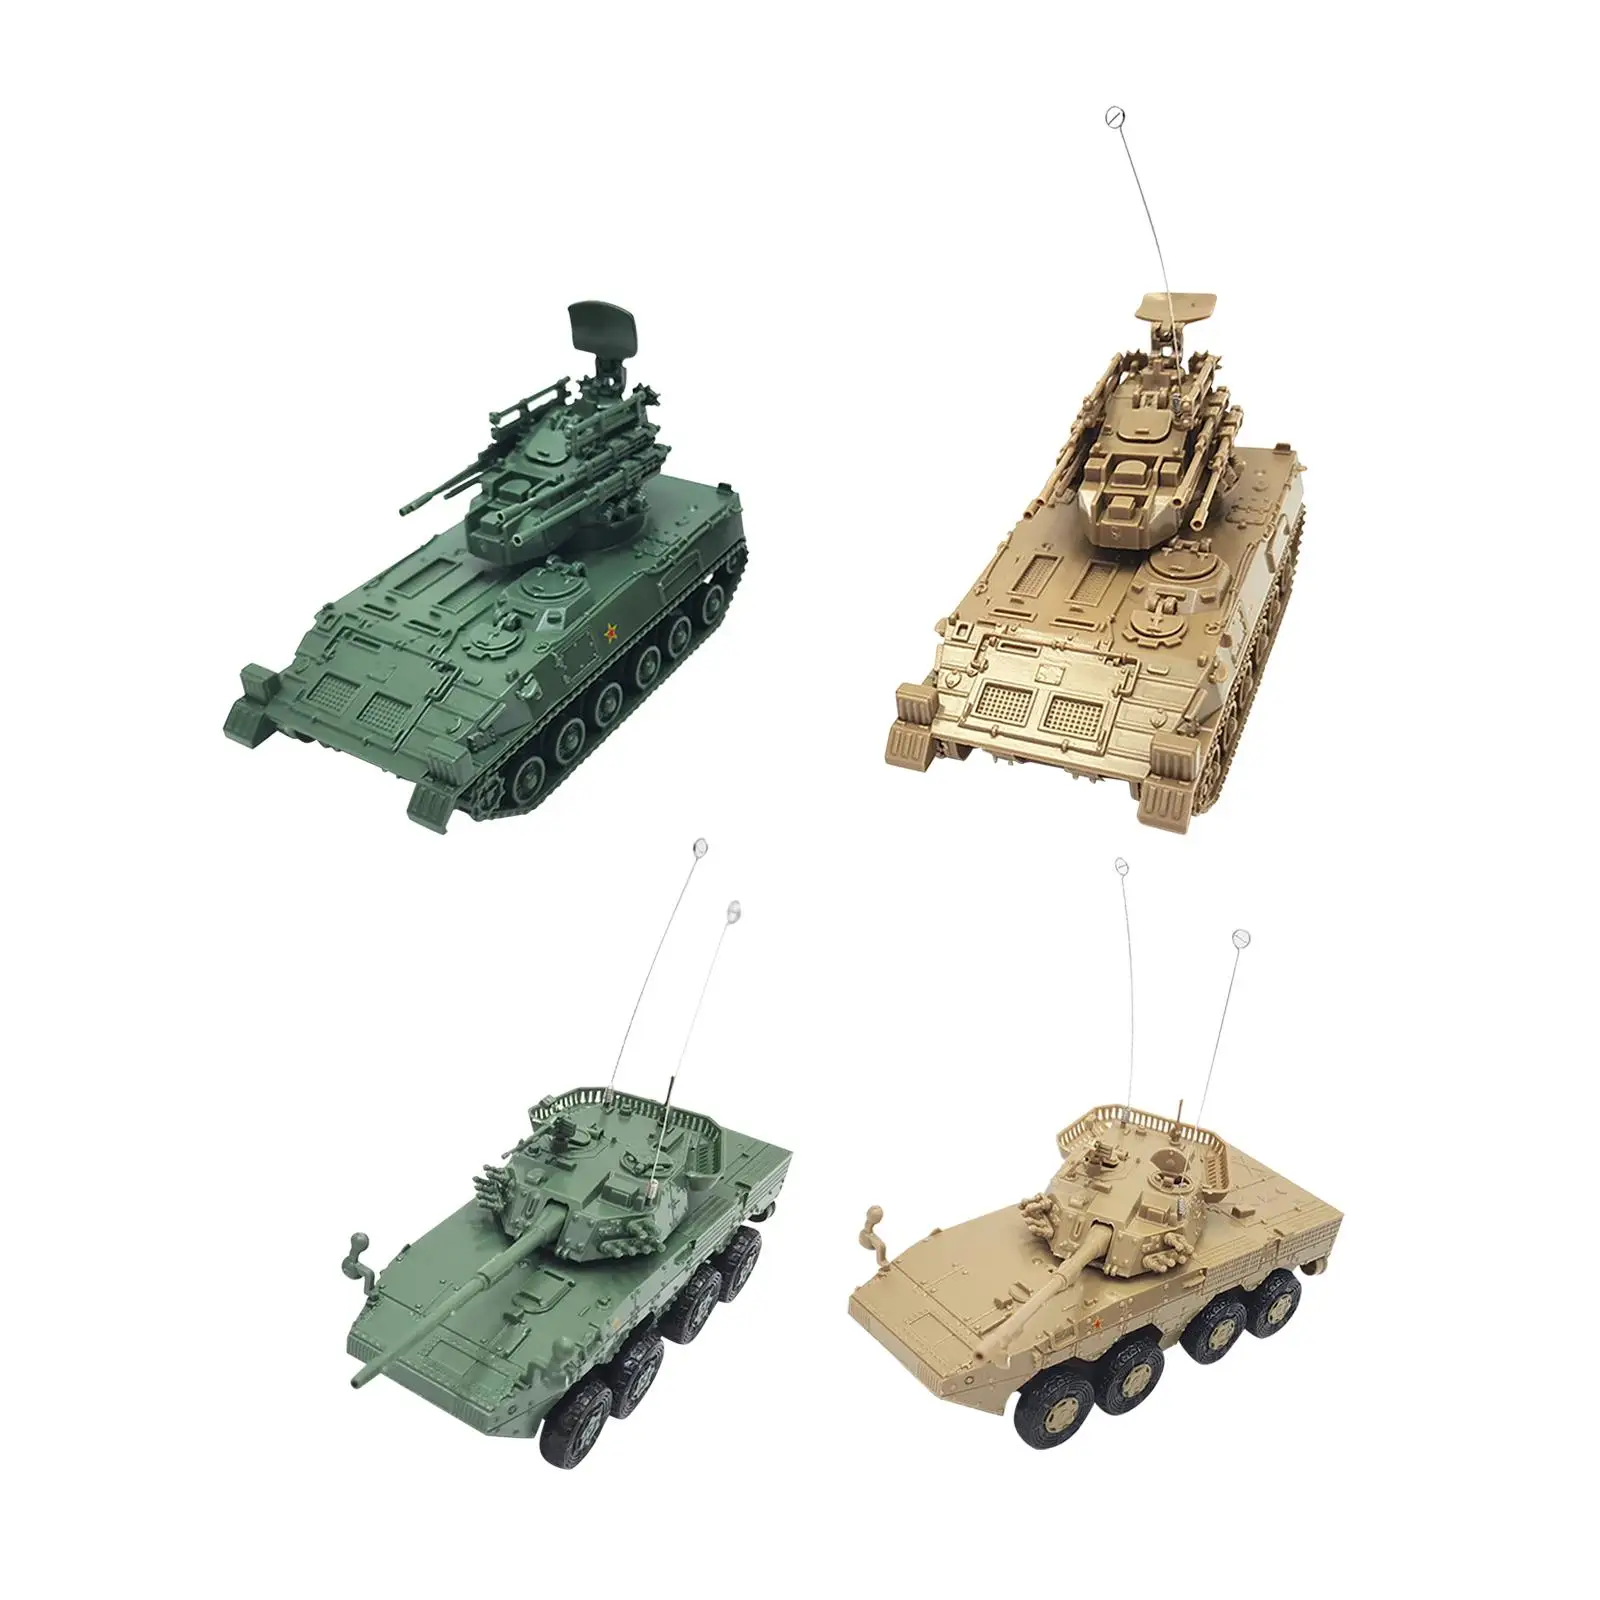 1/72 Armored Tank Model Crafts Building Model Armored Vehicles for Tabletop Decor Table Scene Education Toy Adults Party Favors